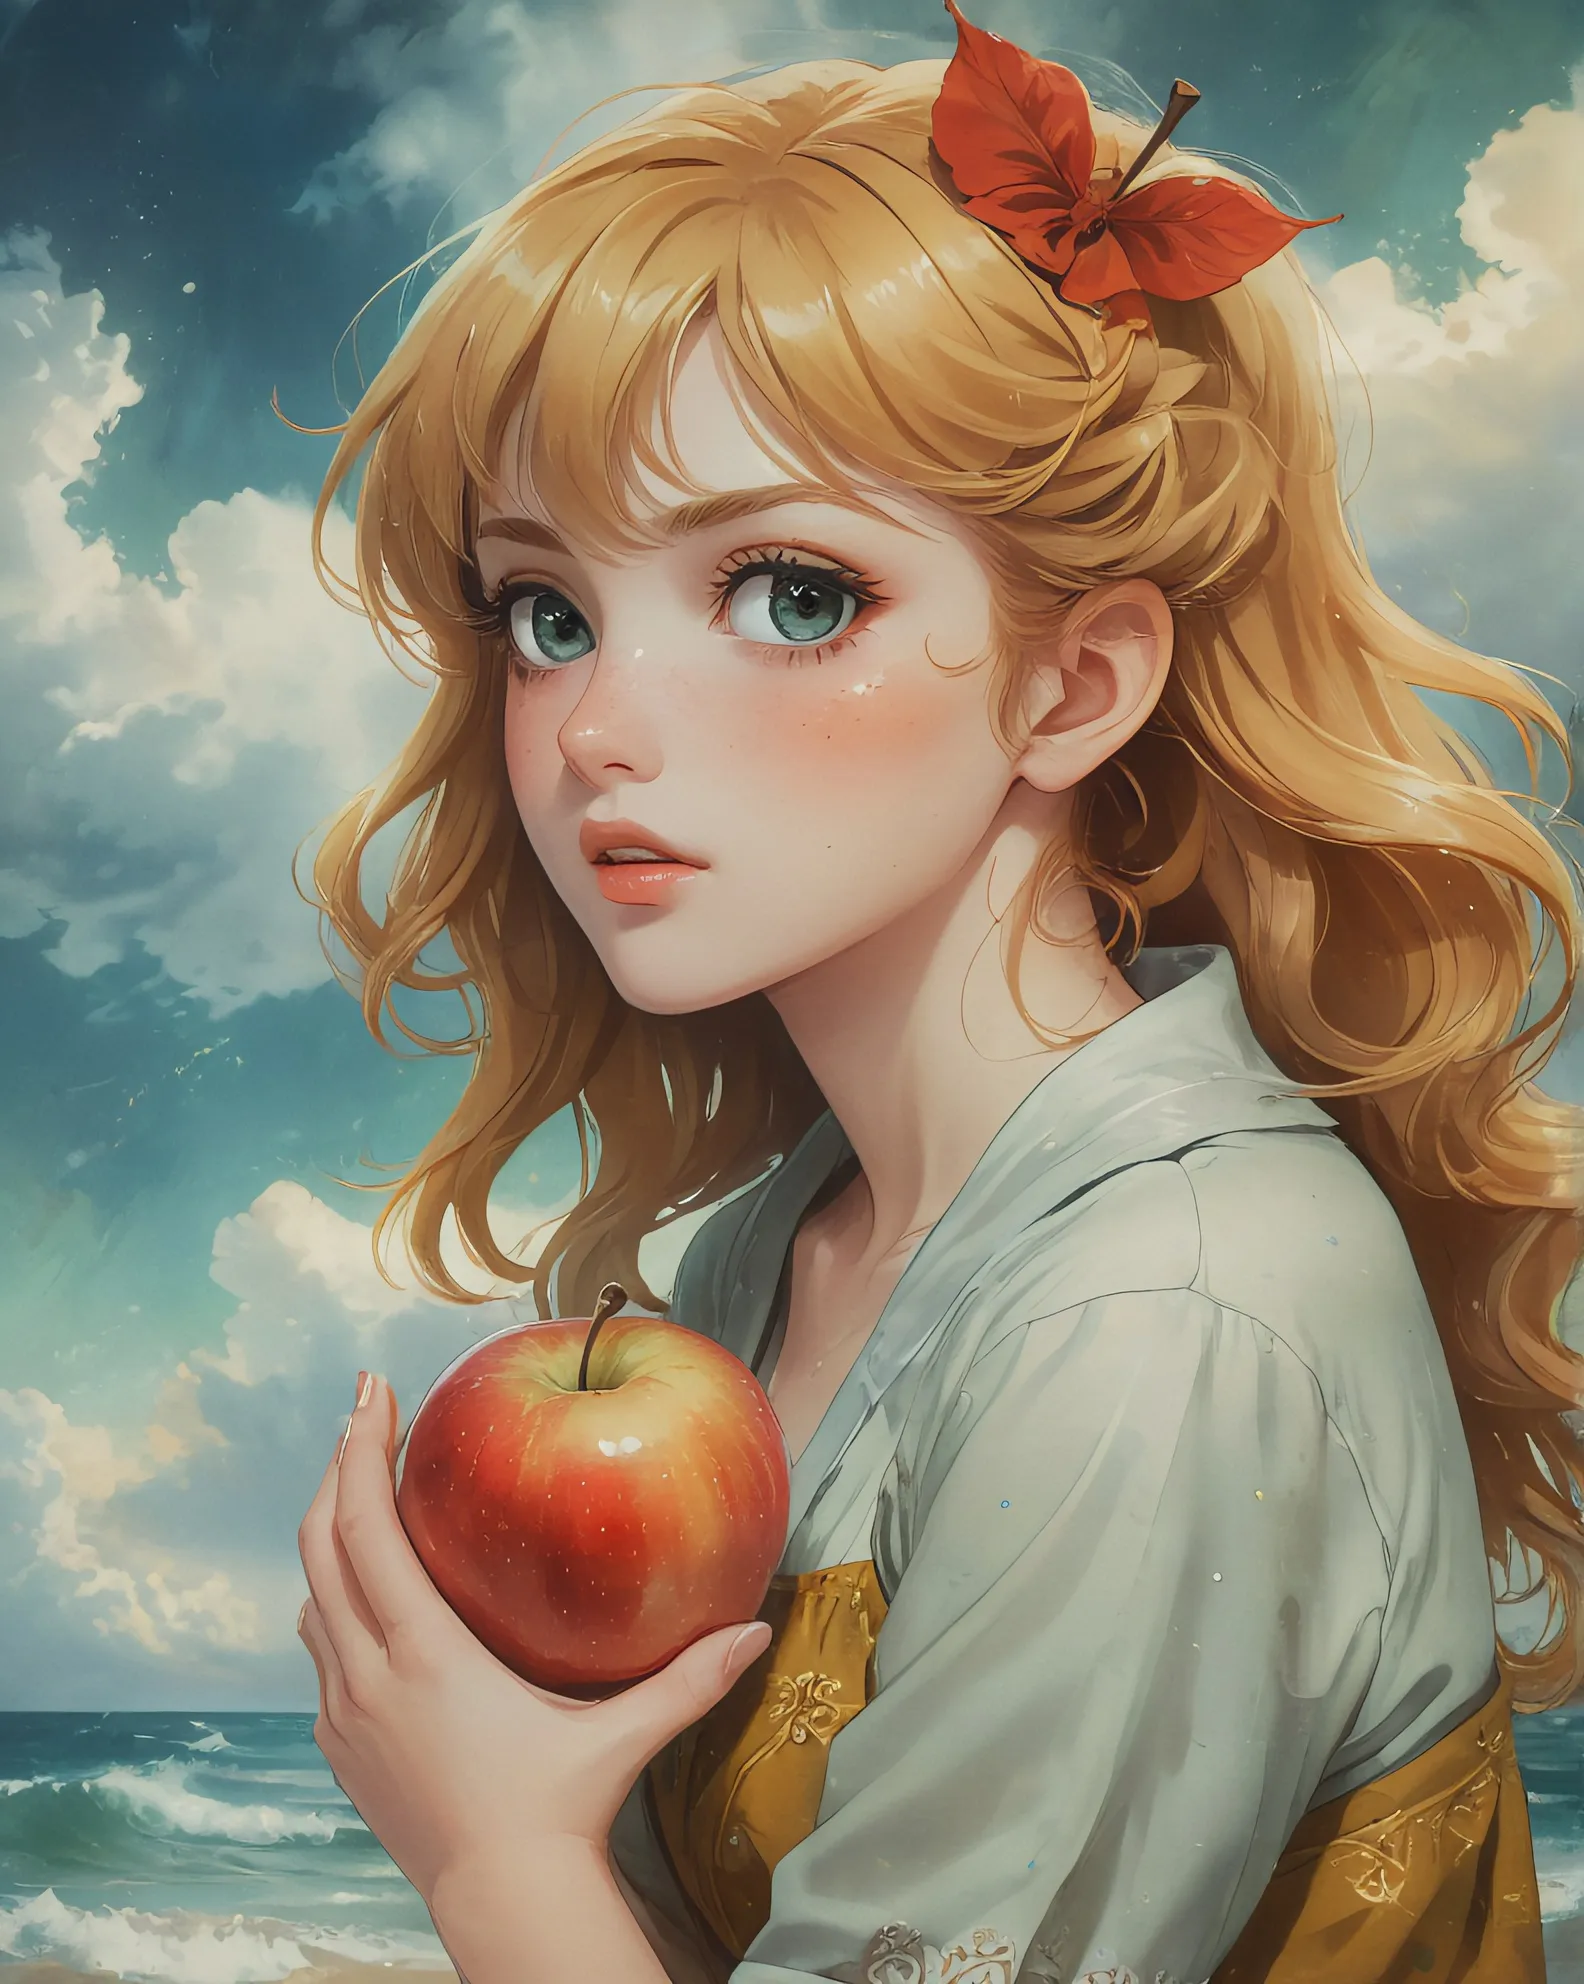 With an apple